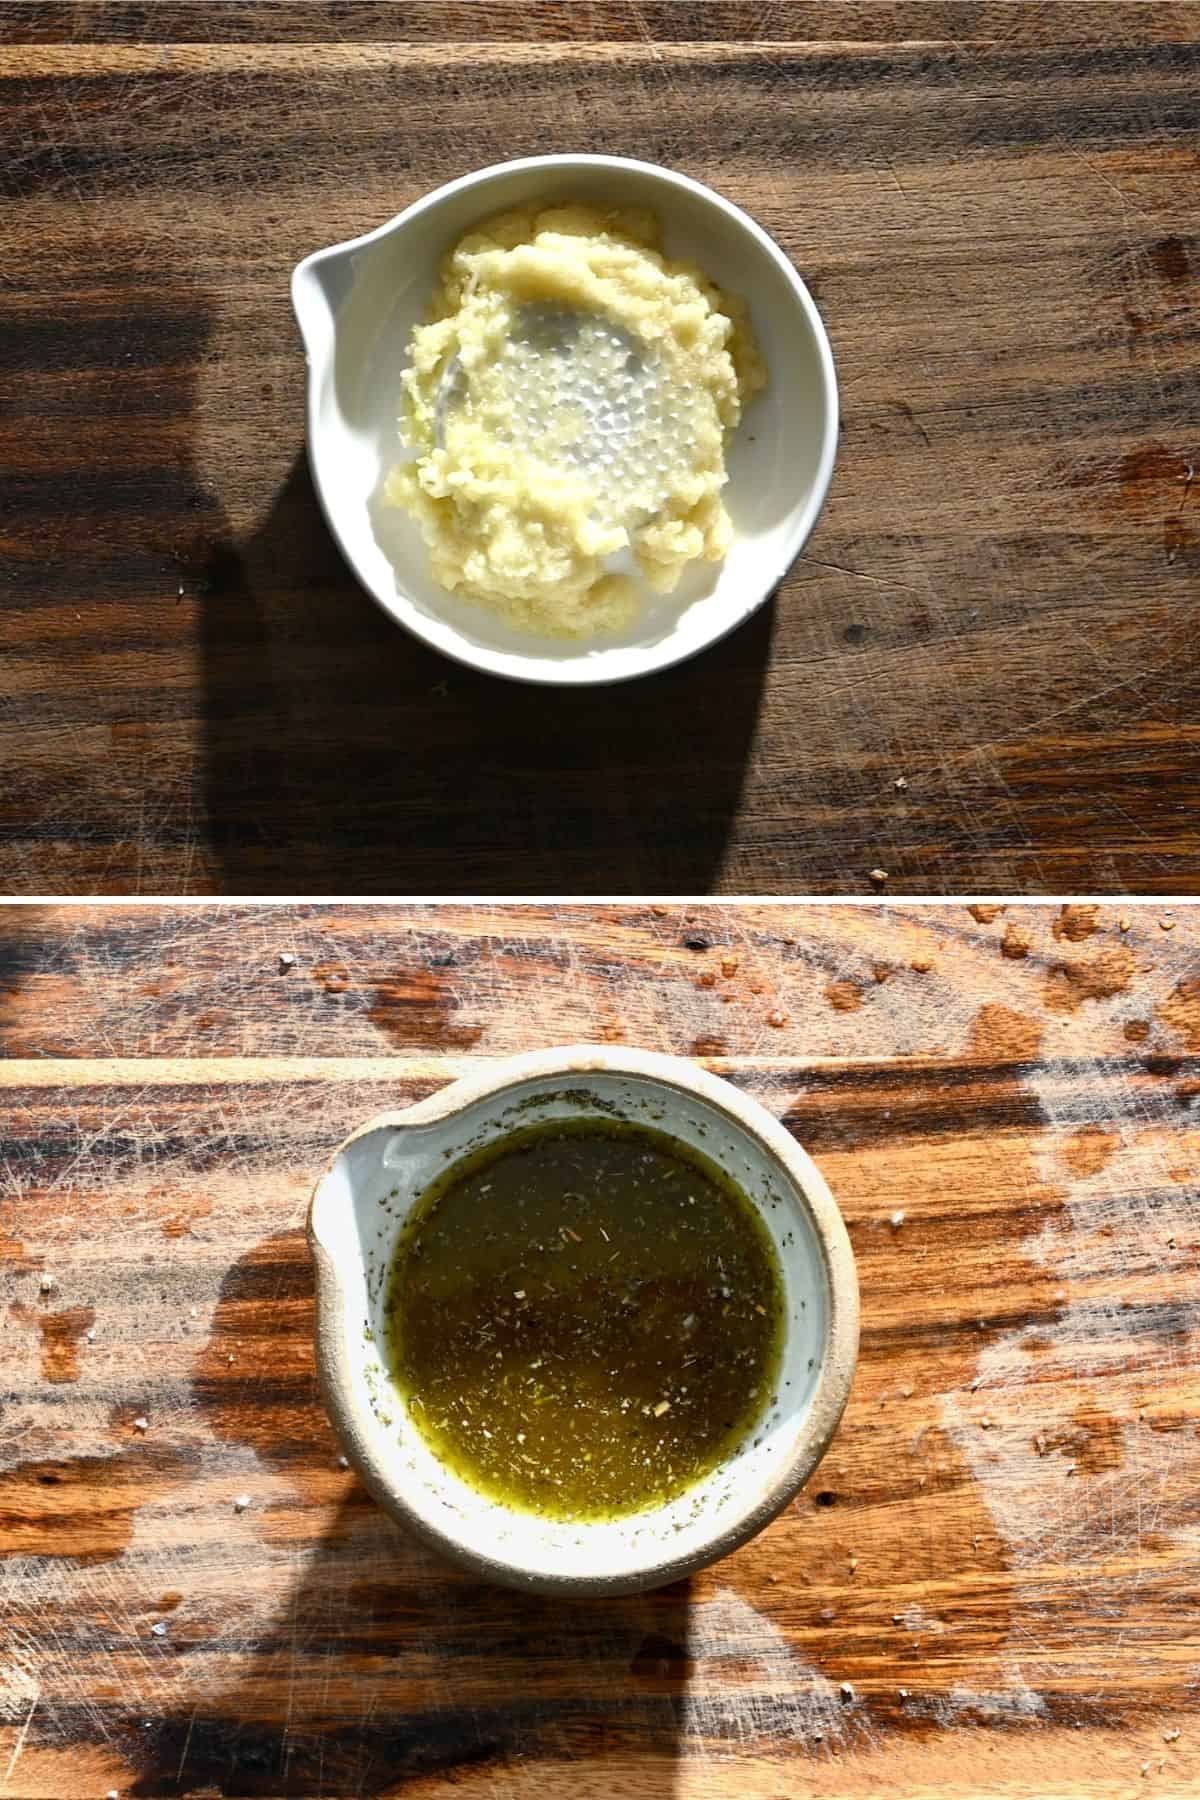 Showing grated garlic and salad dressing in a bowl